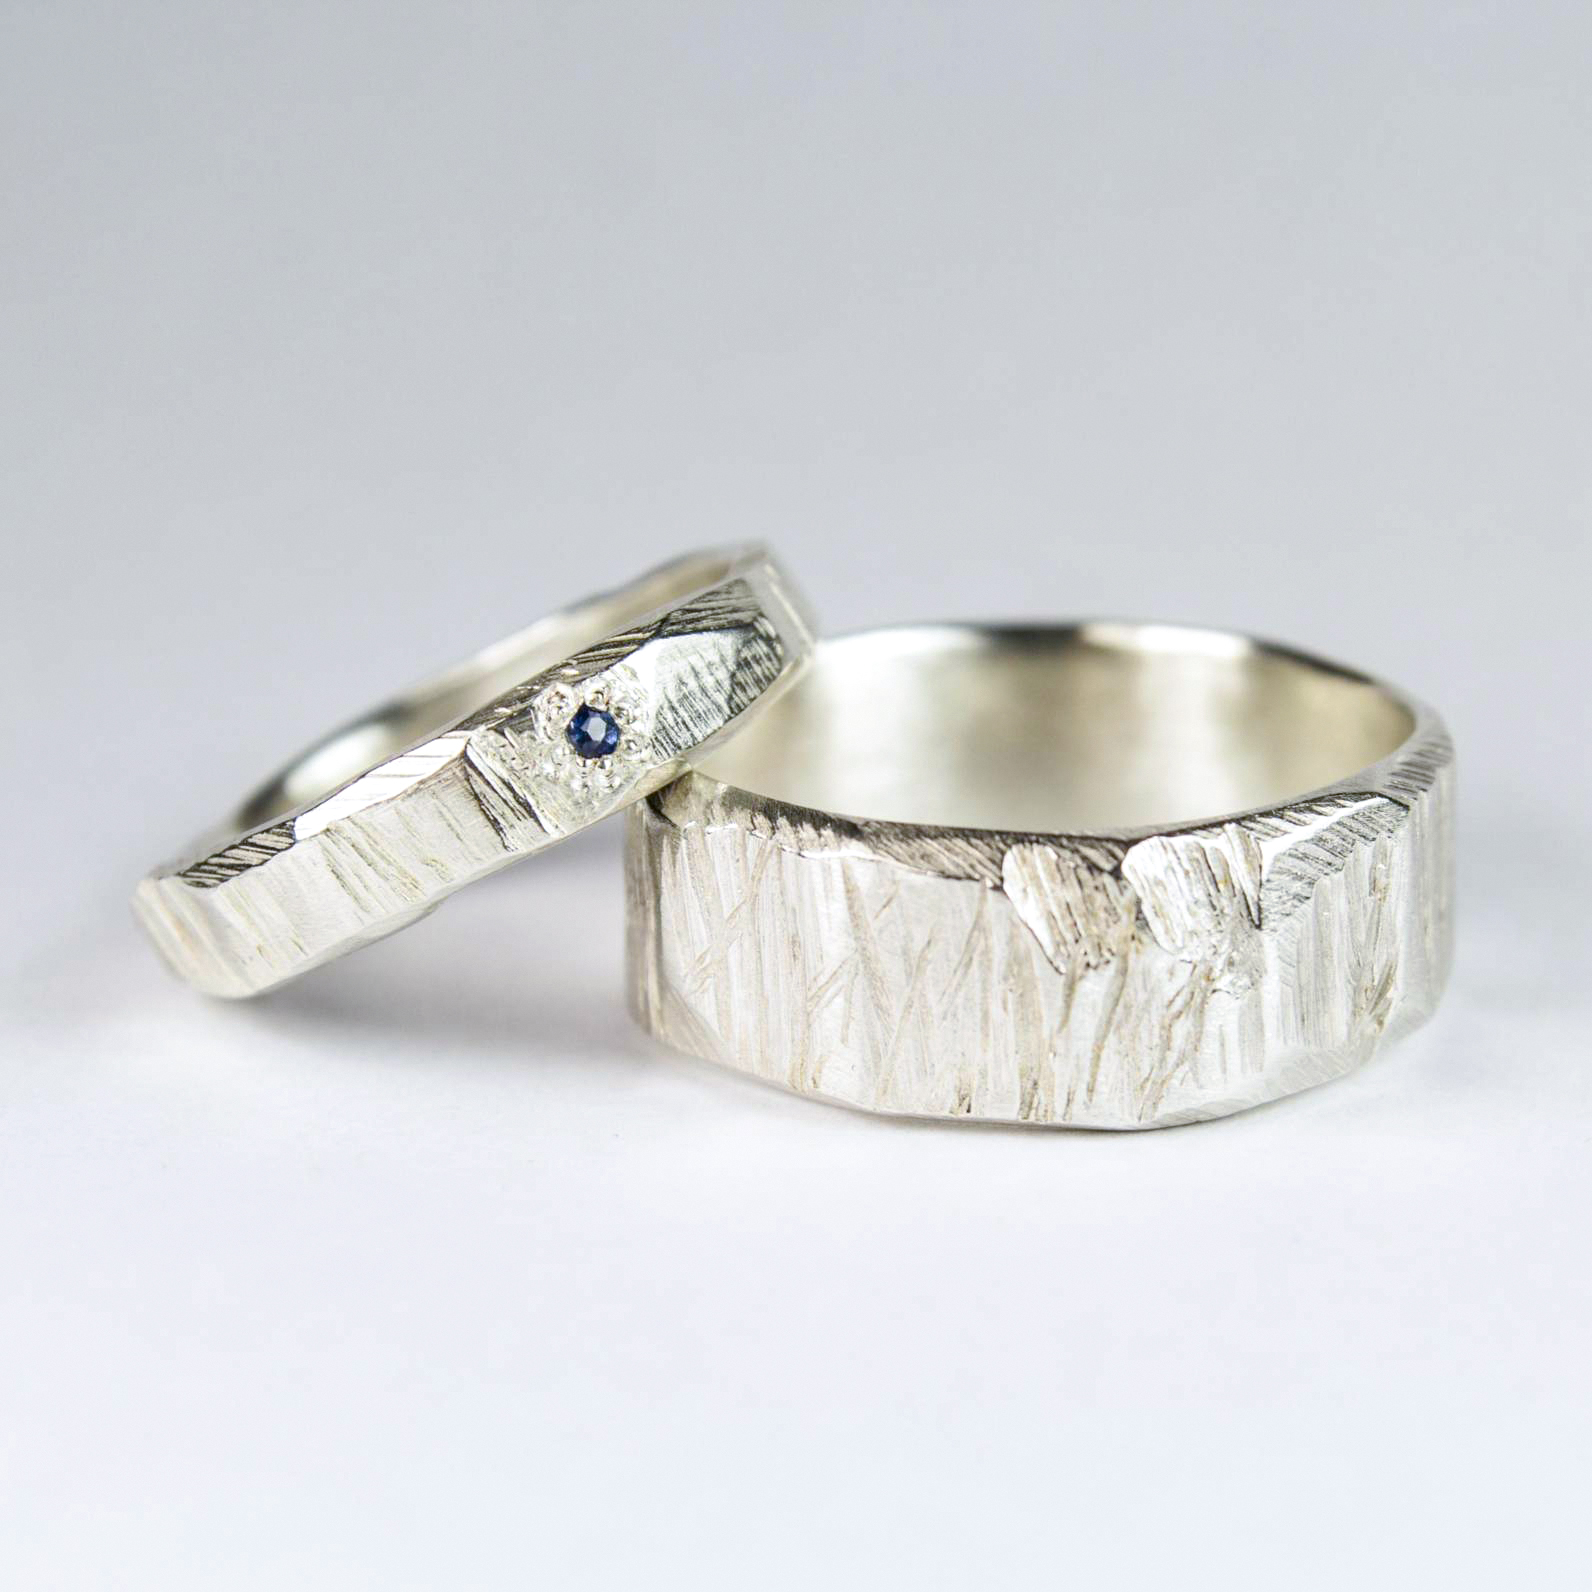 Bark textured rings in Sterling Silver, with Ceylon Sapphire